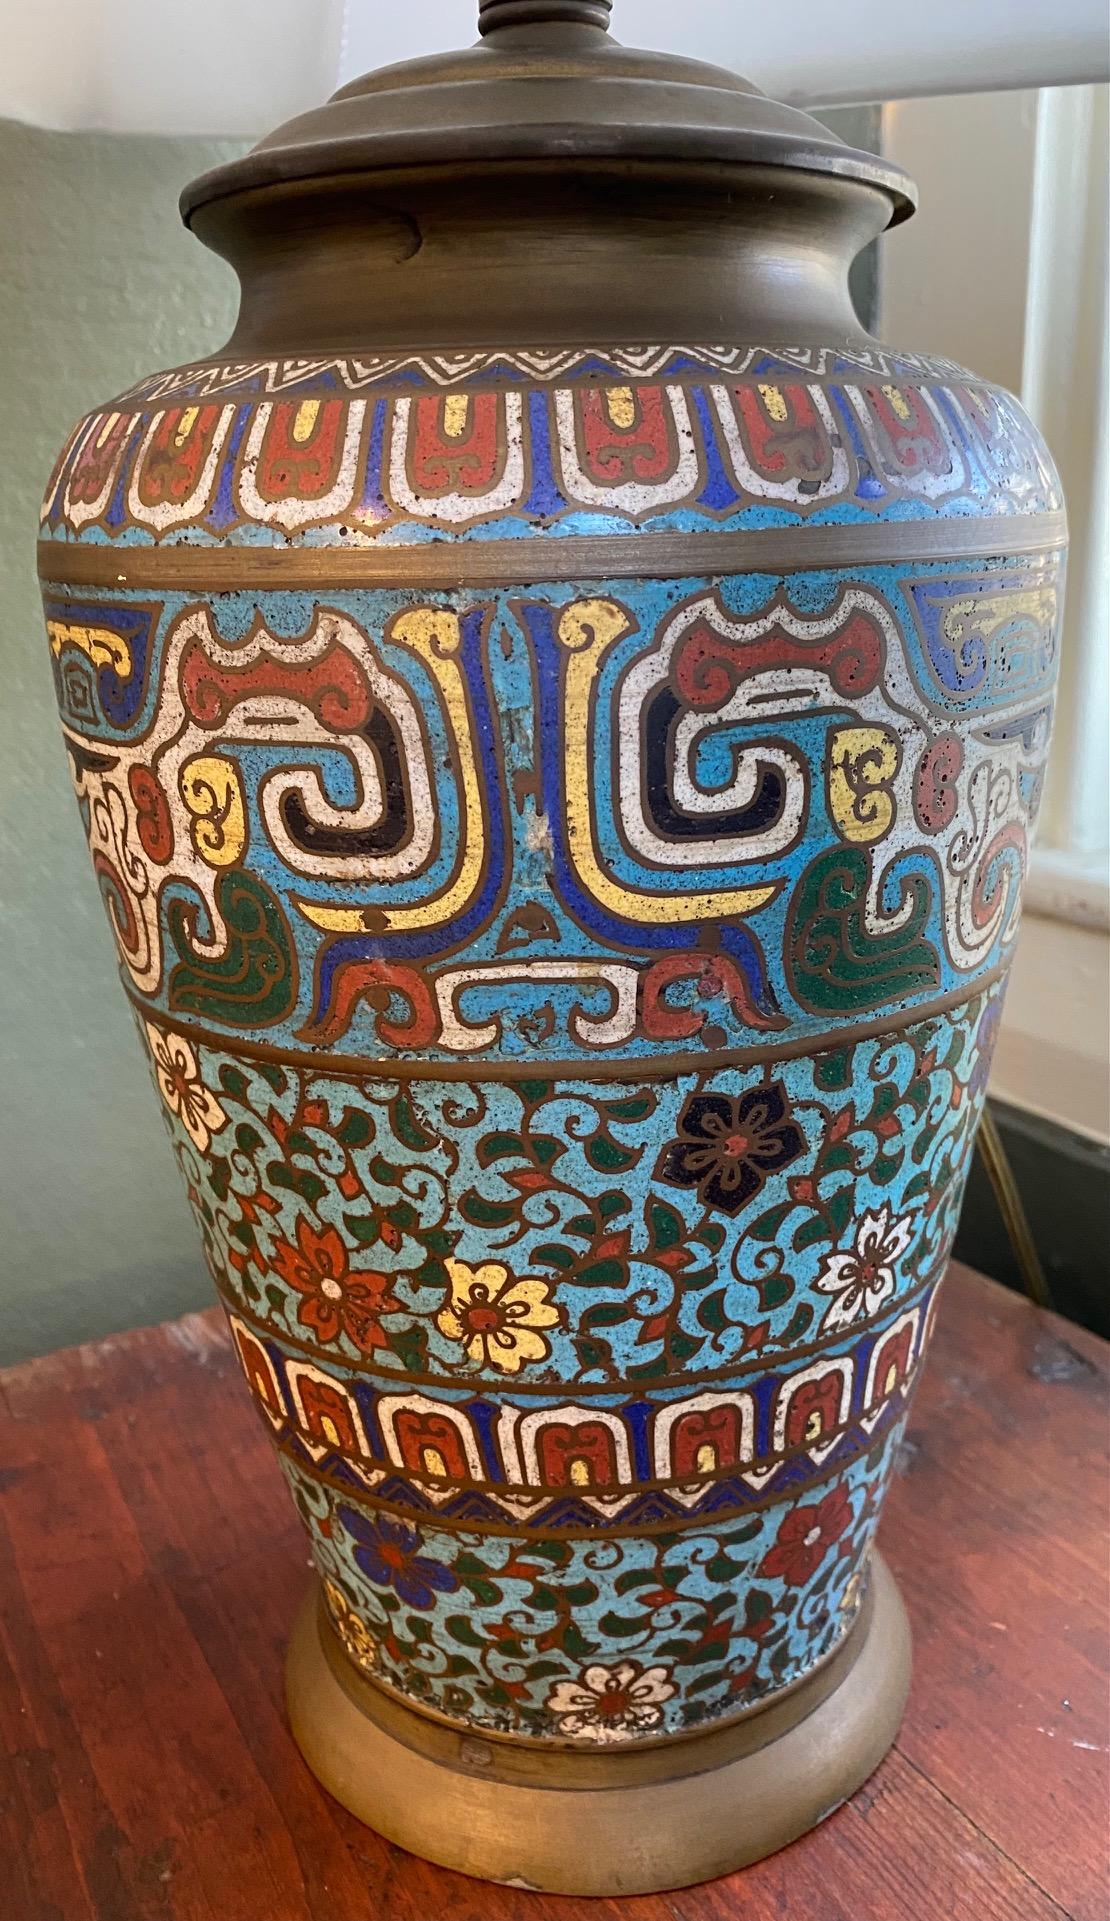 Antique Japanese Cloisonné Lamp, circa 1910, with blue, red and yellow enamel inlay on brass baluster shaped vase, mounted as a table lamp and electrified; stamped 